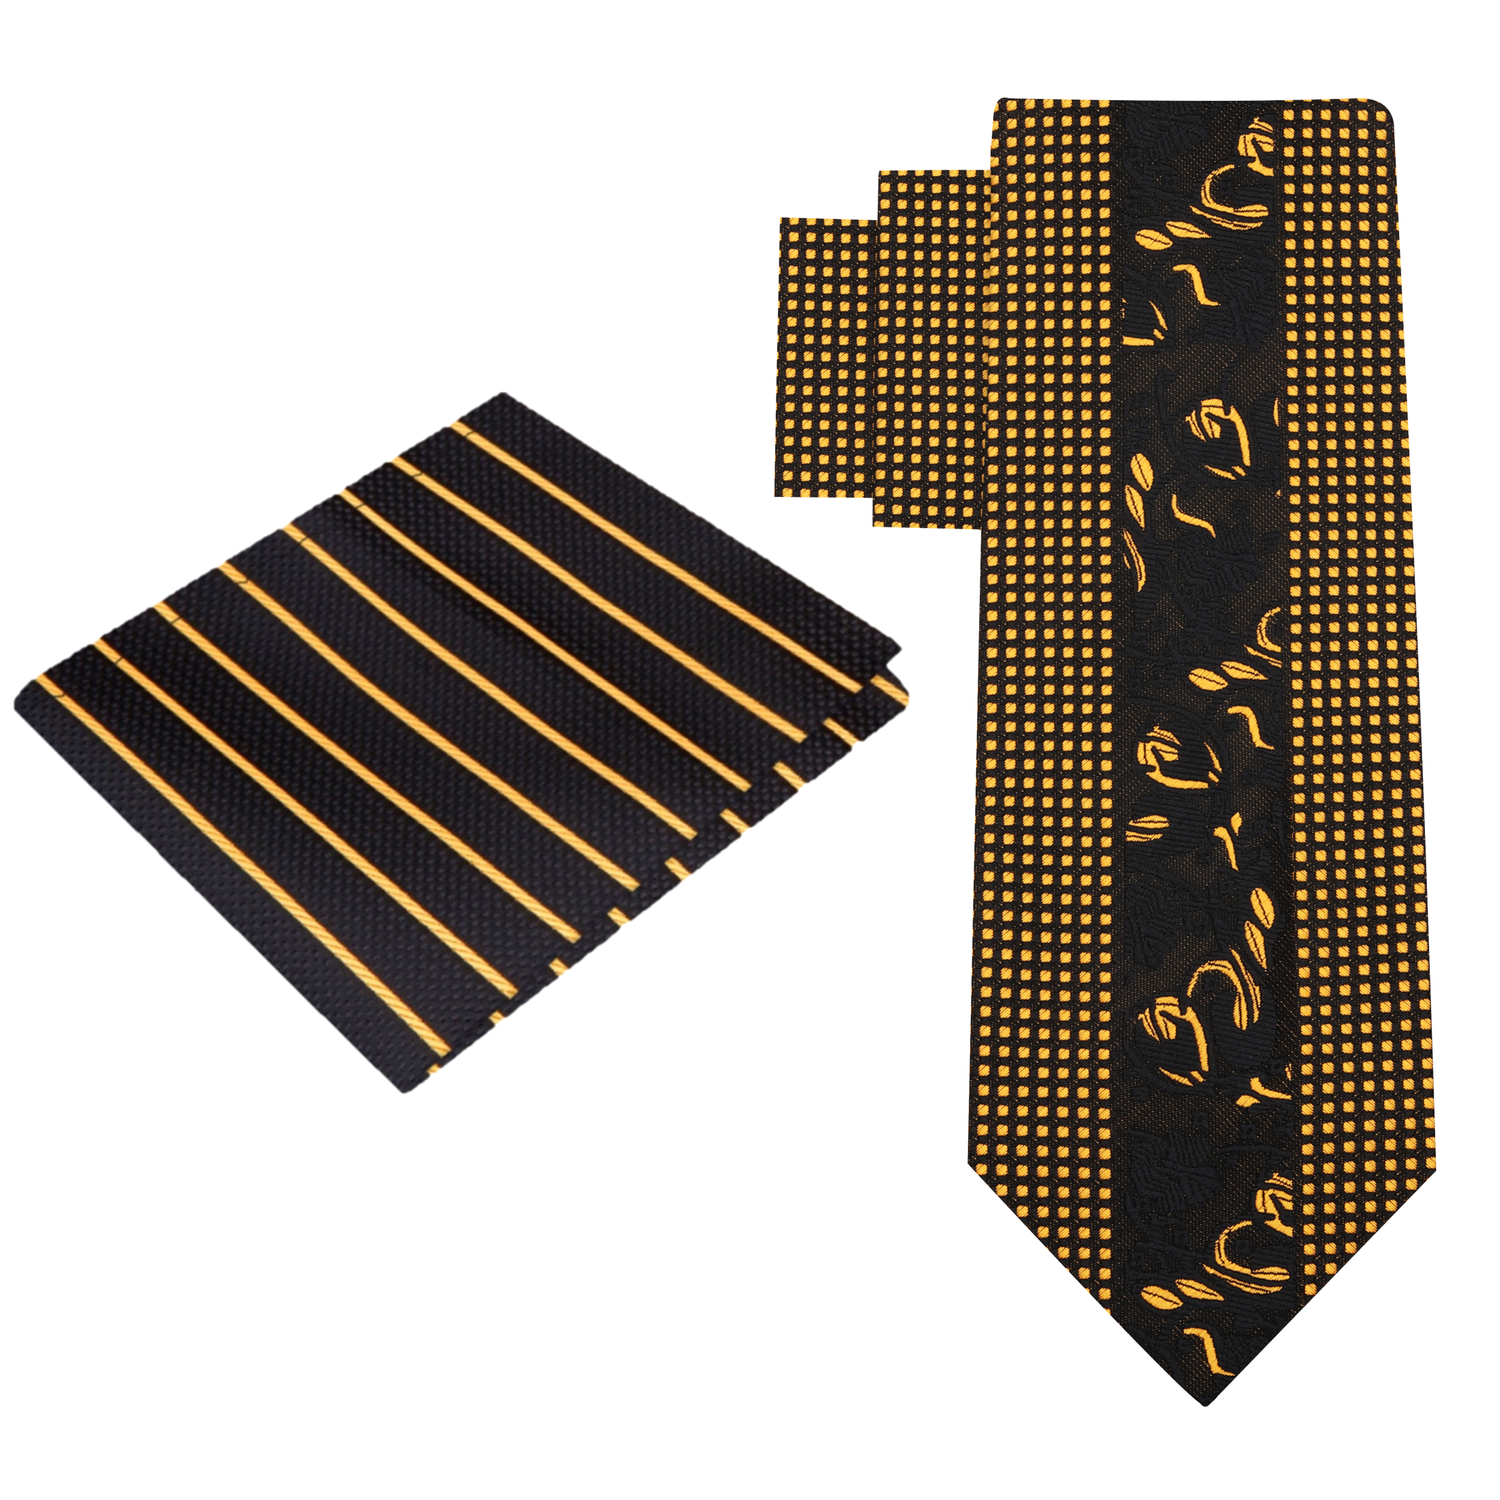 Alt View: Black & Gold Floral and Check Necktie with Black, Gold Stripe Square